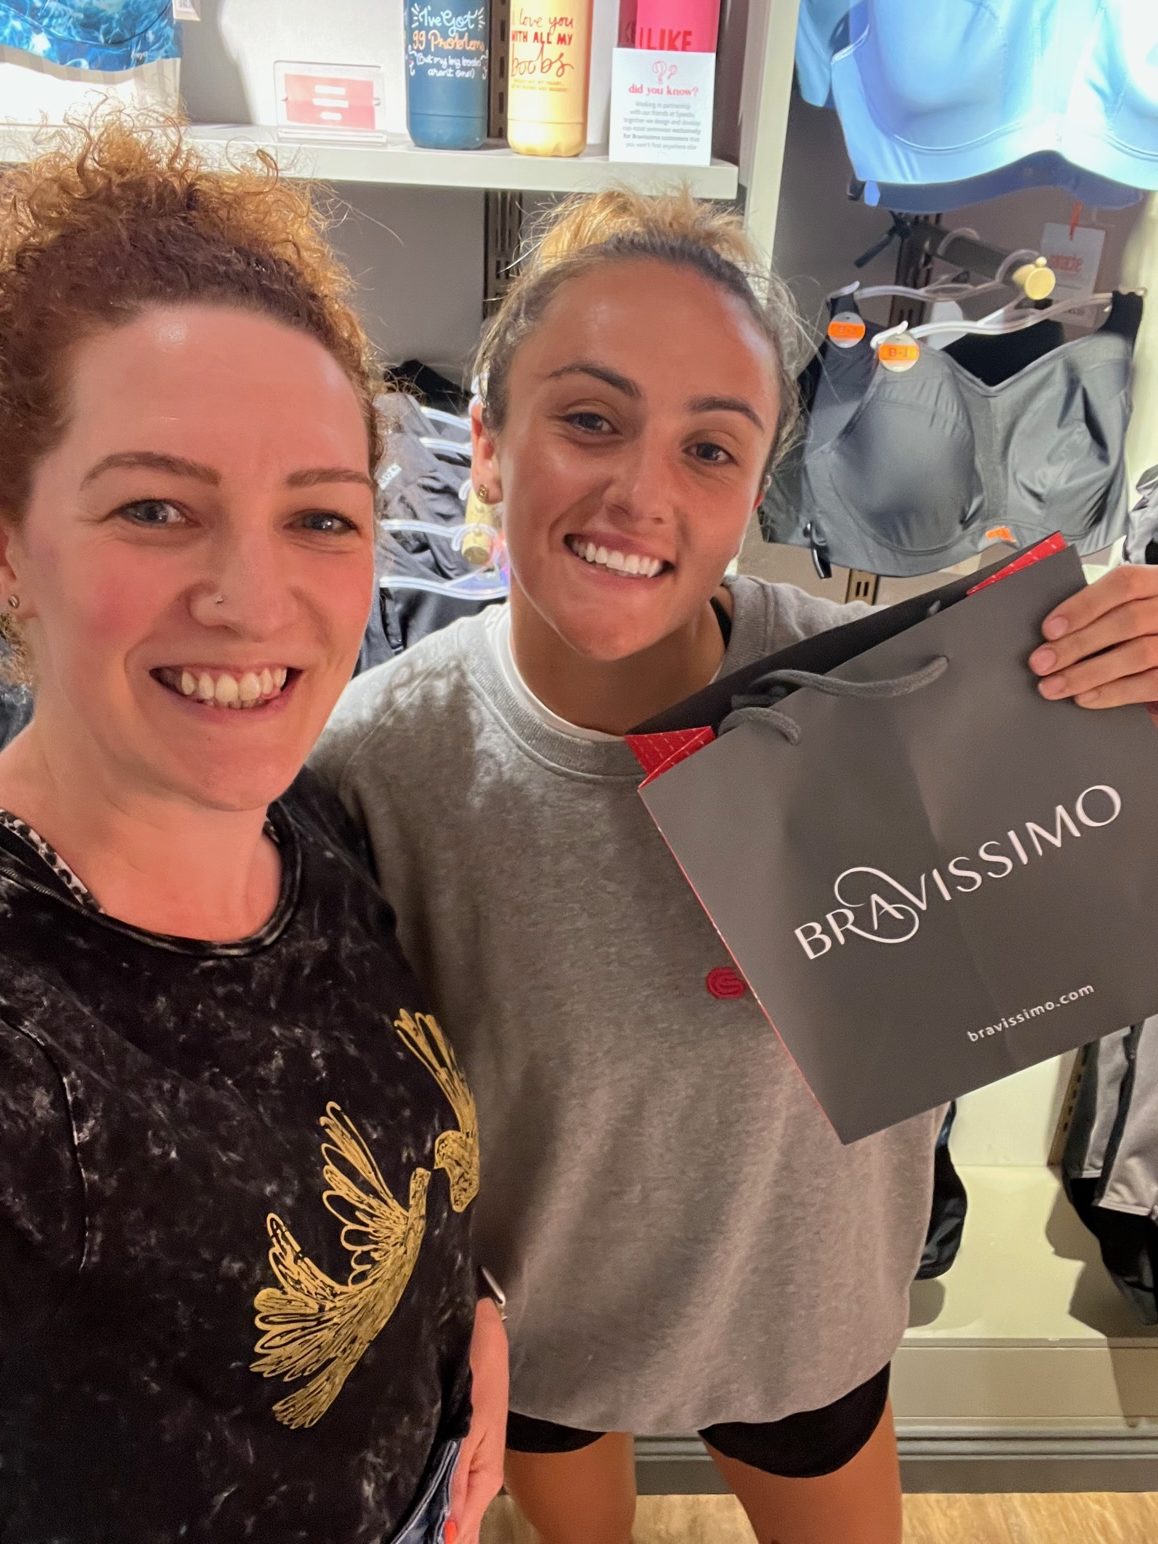 Selfie of two White women posing in front of a display of sports bras. Both are smiling at the camera, and one holds up a "Bravissimo" carrier bag